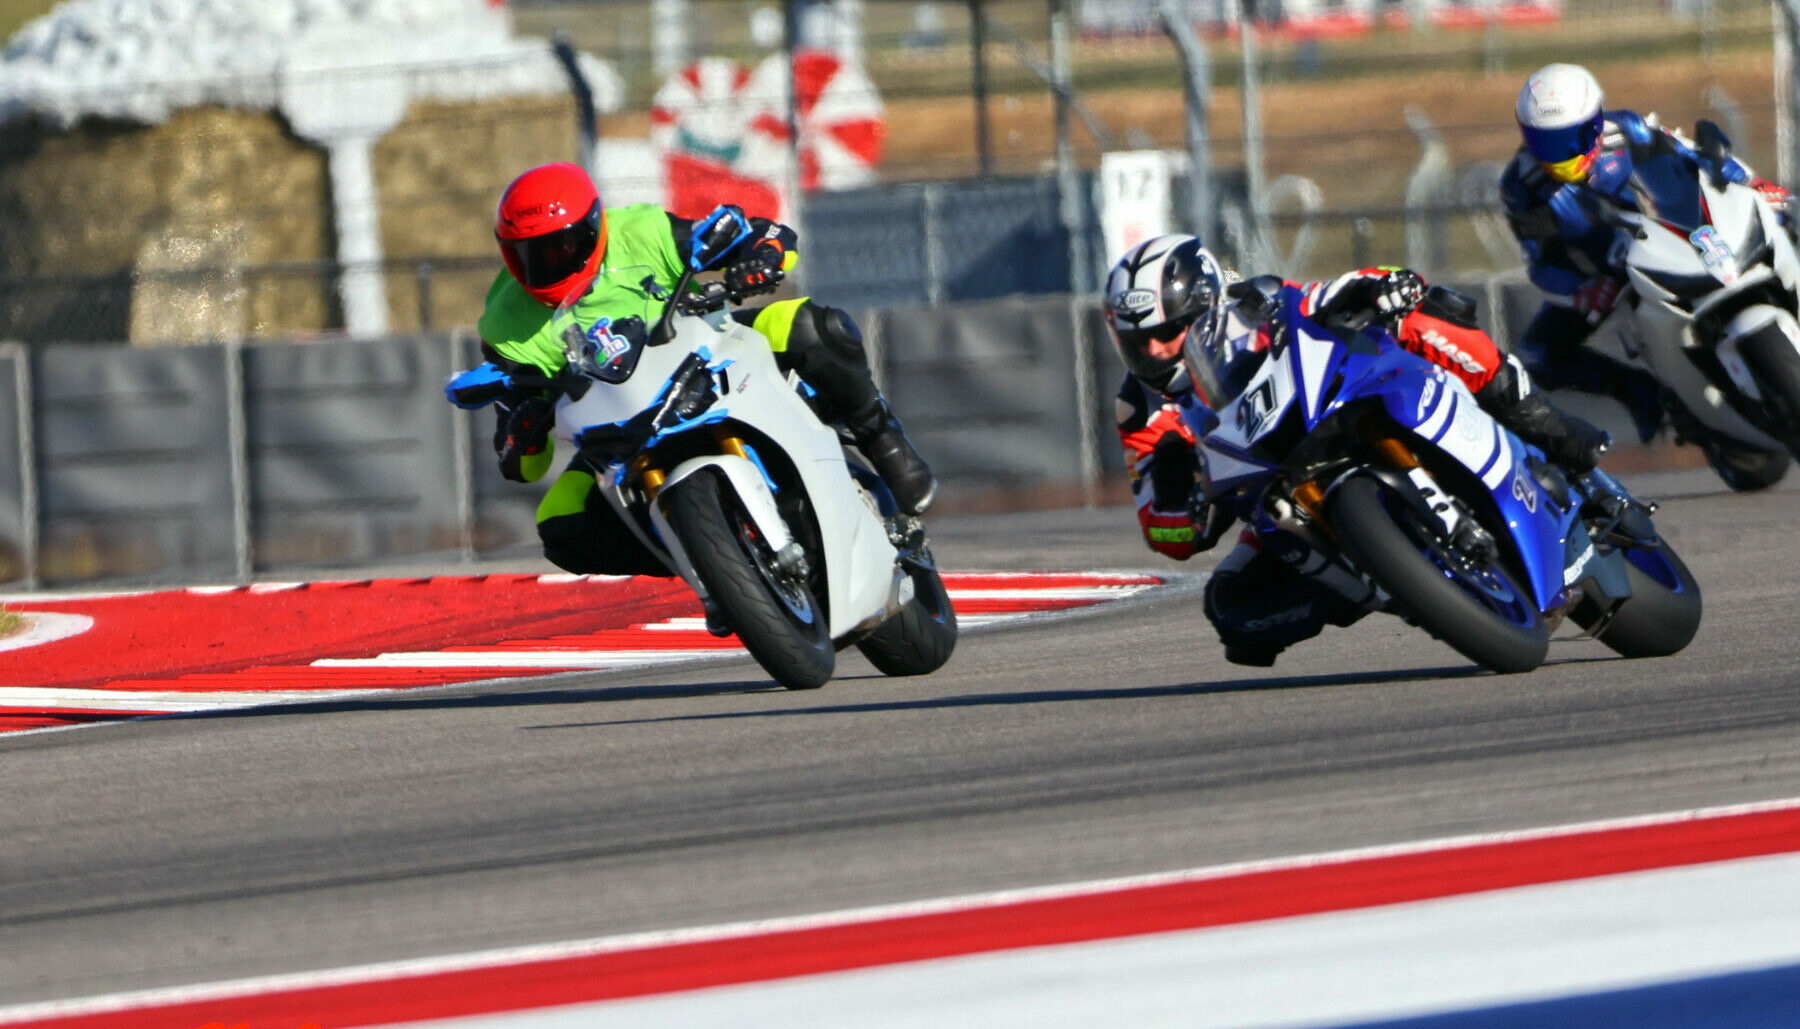 Action from a previous RideSmart track day event at Circuit of The America (COTA). Photo by Blair Hart/Hart Photography, courtesy RideSmart.